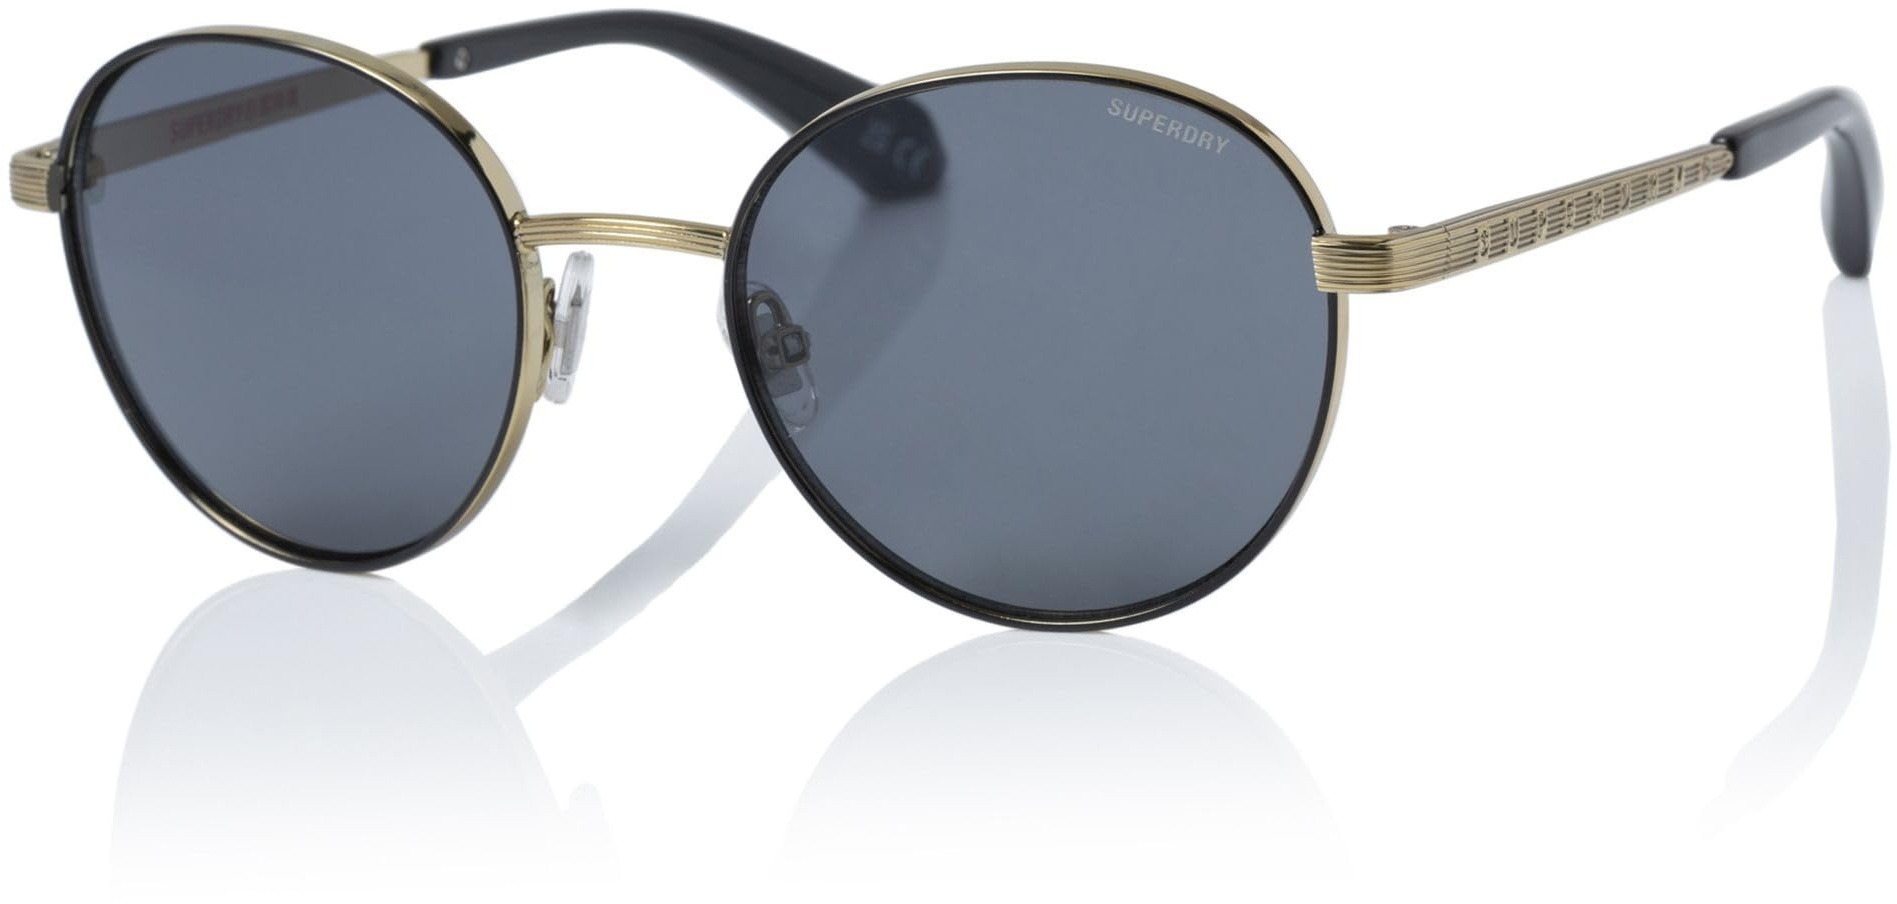 Superdry Sunglasses SDS 5001 201 Shiny Gold/Solid Smoke